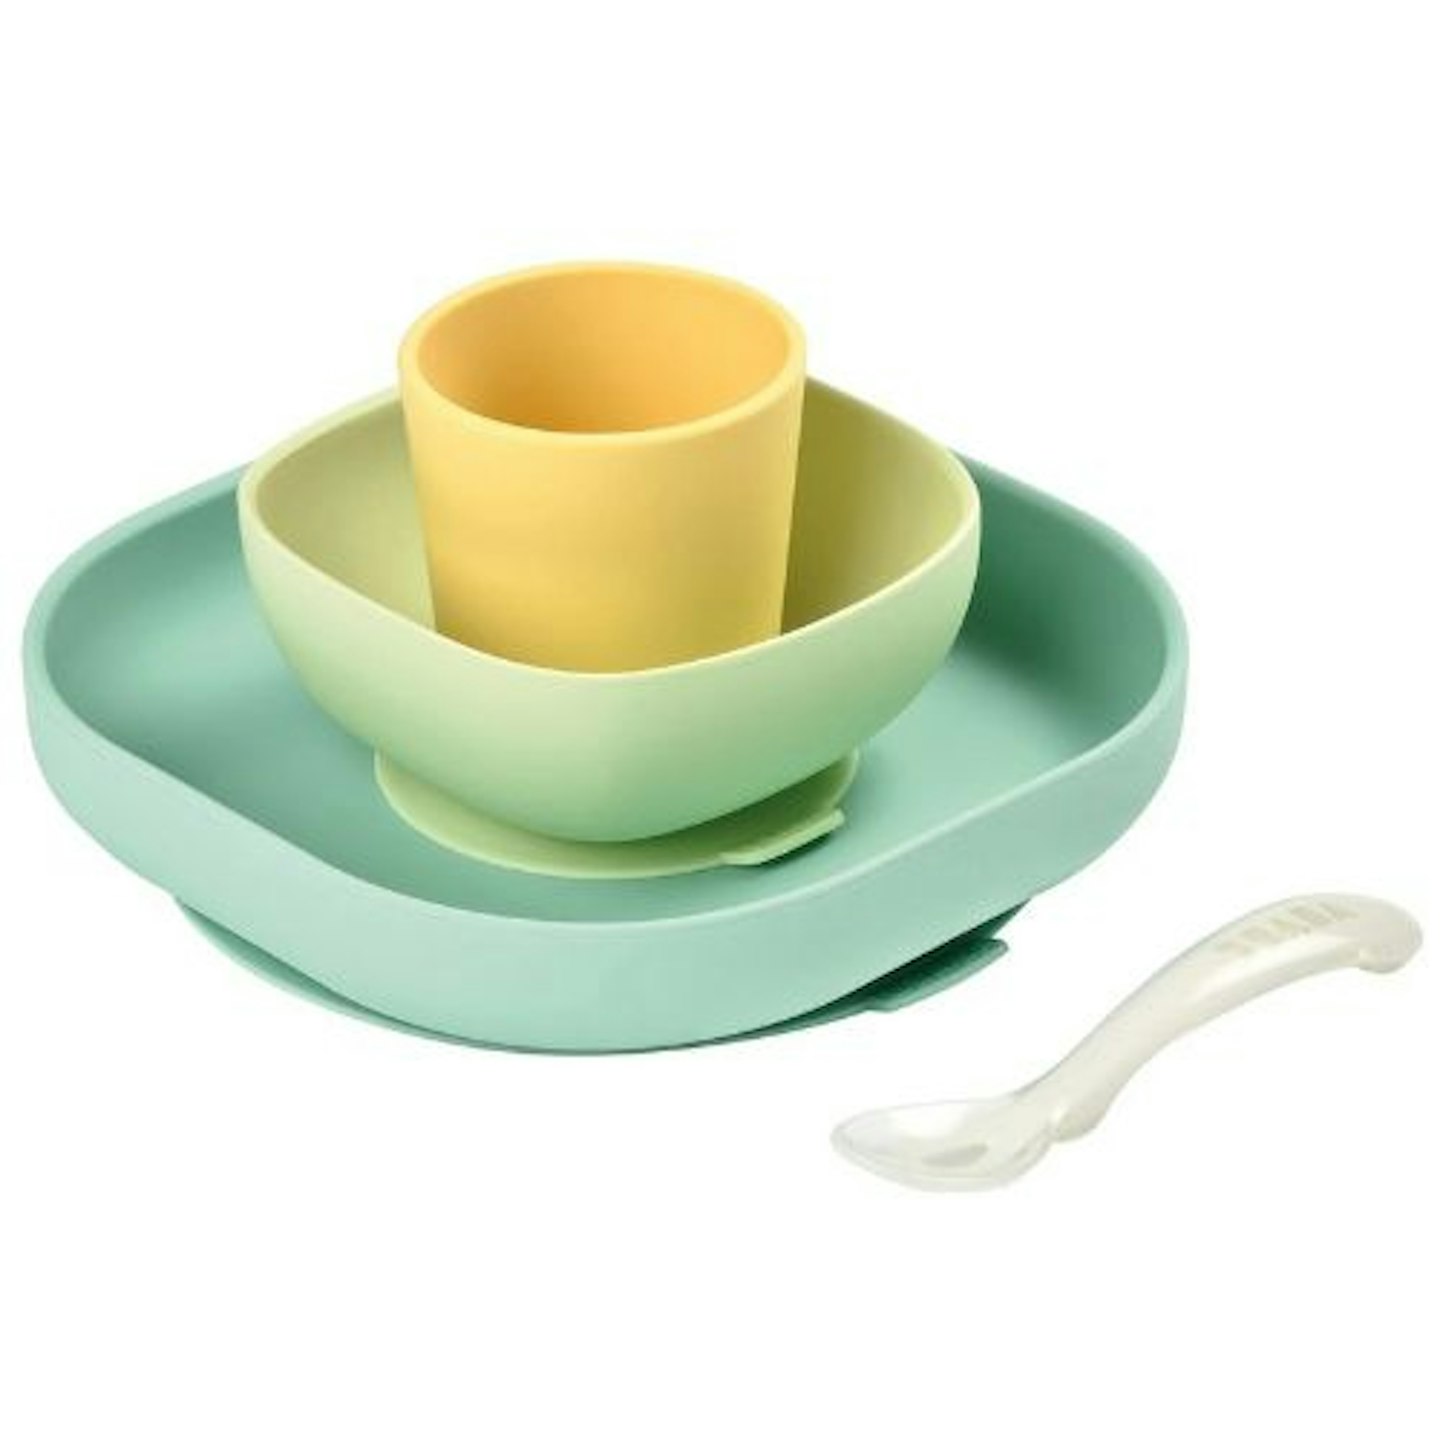 Best weaning sets Béaba 4 Piece Silicone Meal Set